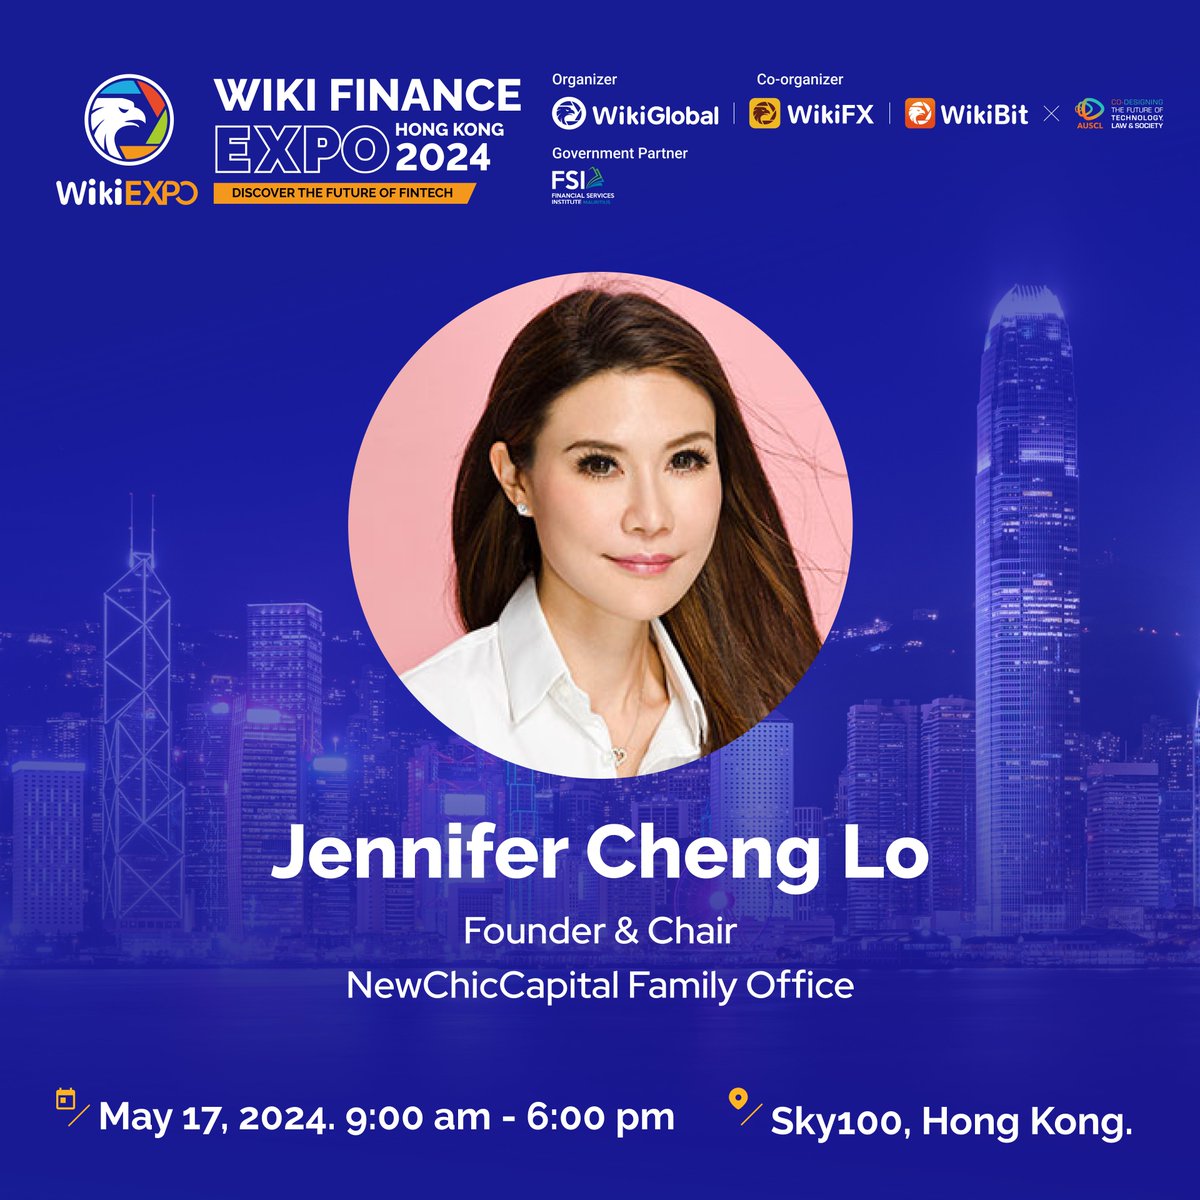 Meet @JenniferChengLo at #WikiEXPO 🇭🇰HongKong.

A serial exited award-winning Entrepreneur, Investor, Creator, Speaker, Podcaster, Writer, Author, Classical Concert Pianist, Actress and Model,
 
Catch her in Hong Kong on 5.17.
lnkd.in/gQfZnGQj